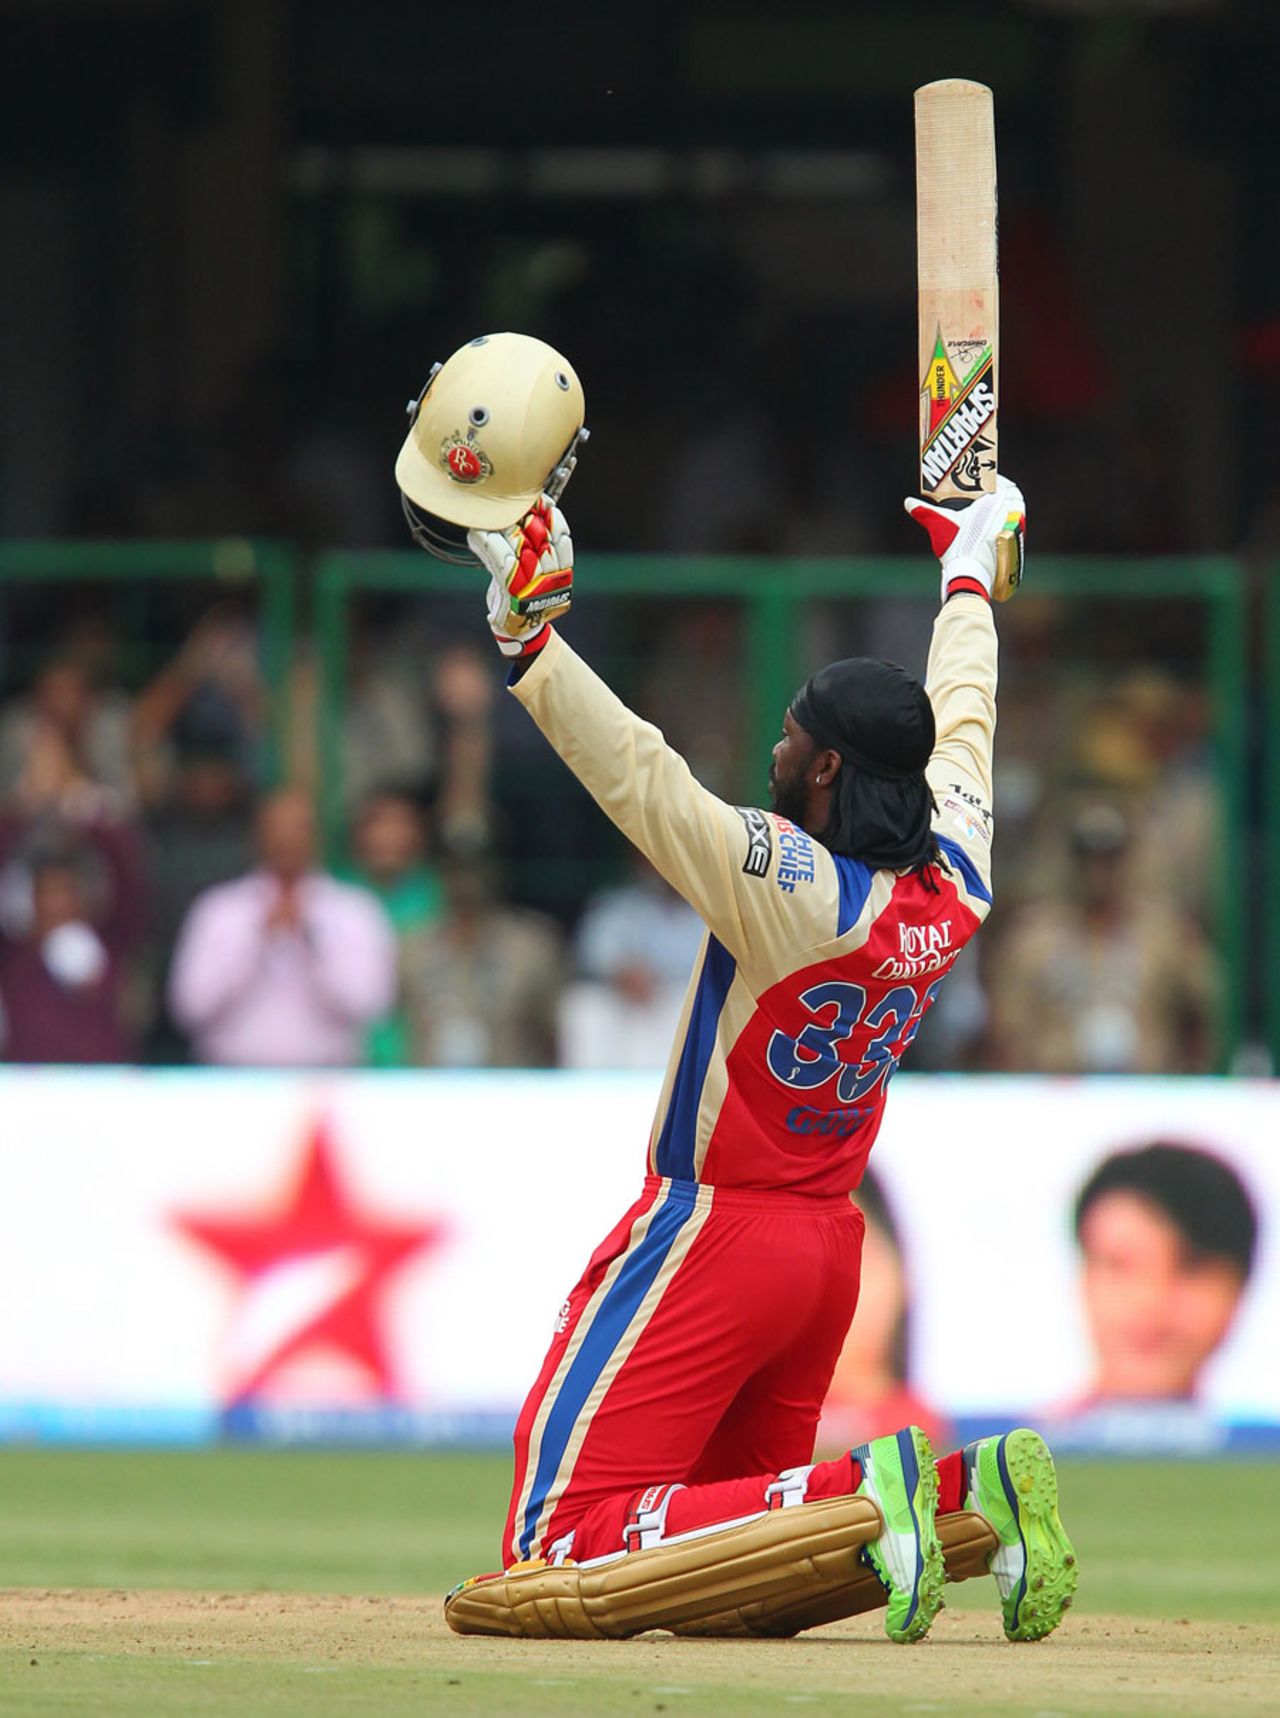 Chris Gayle acknowledges the applause after scoring the fastest century in history, Royal Challengers Bangalore v Pune Warriors, IPL, Bangalore, April 23, 2013